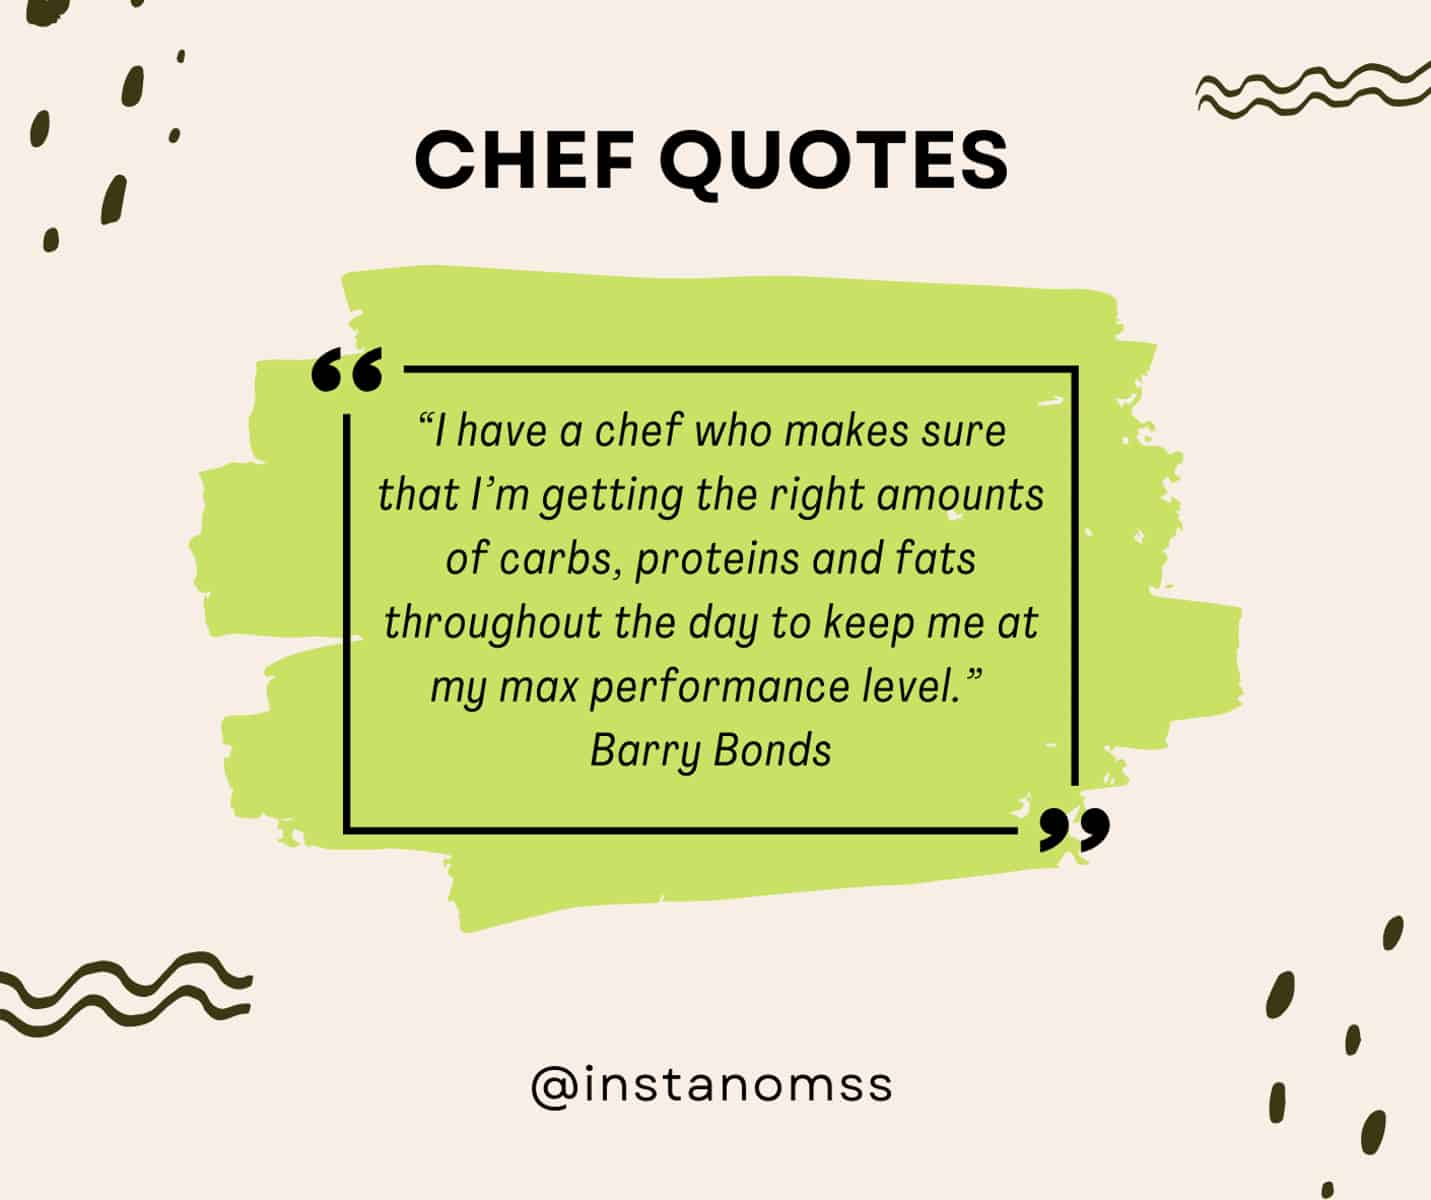 “I have a chef who makes sure that I’m getting the right amounts of carbs, proteins and fats throughout the day to keep me at my max performance level.” Barry Bonds